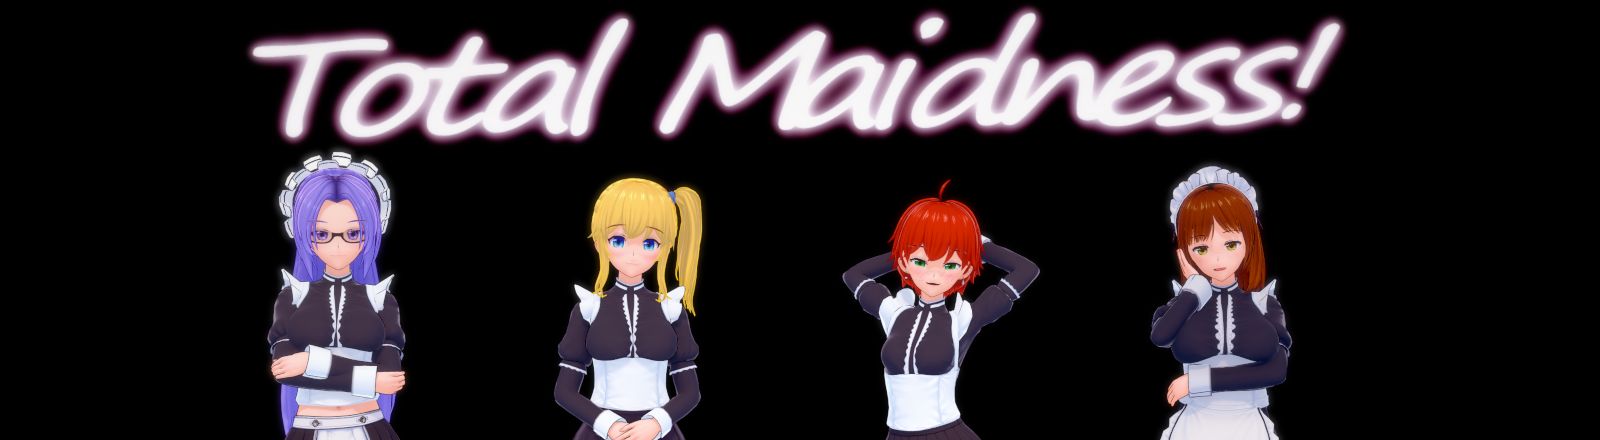 Total Maidness Apk Adult Game Download